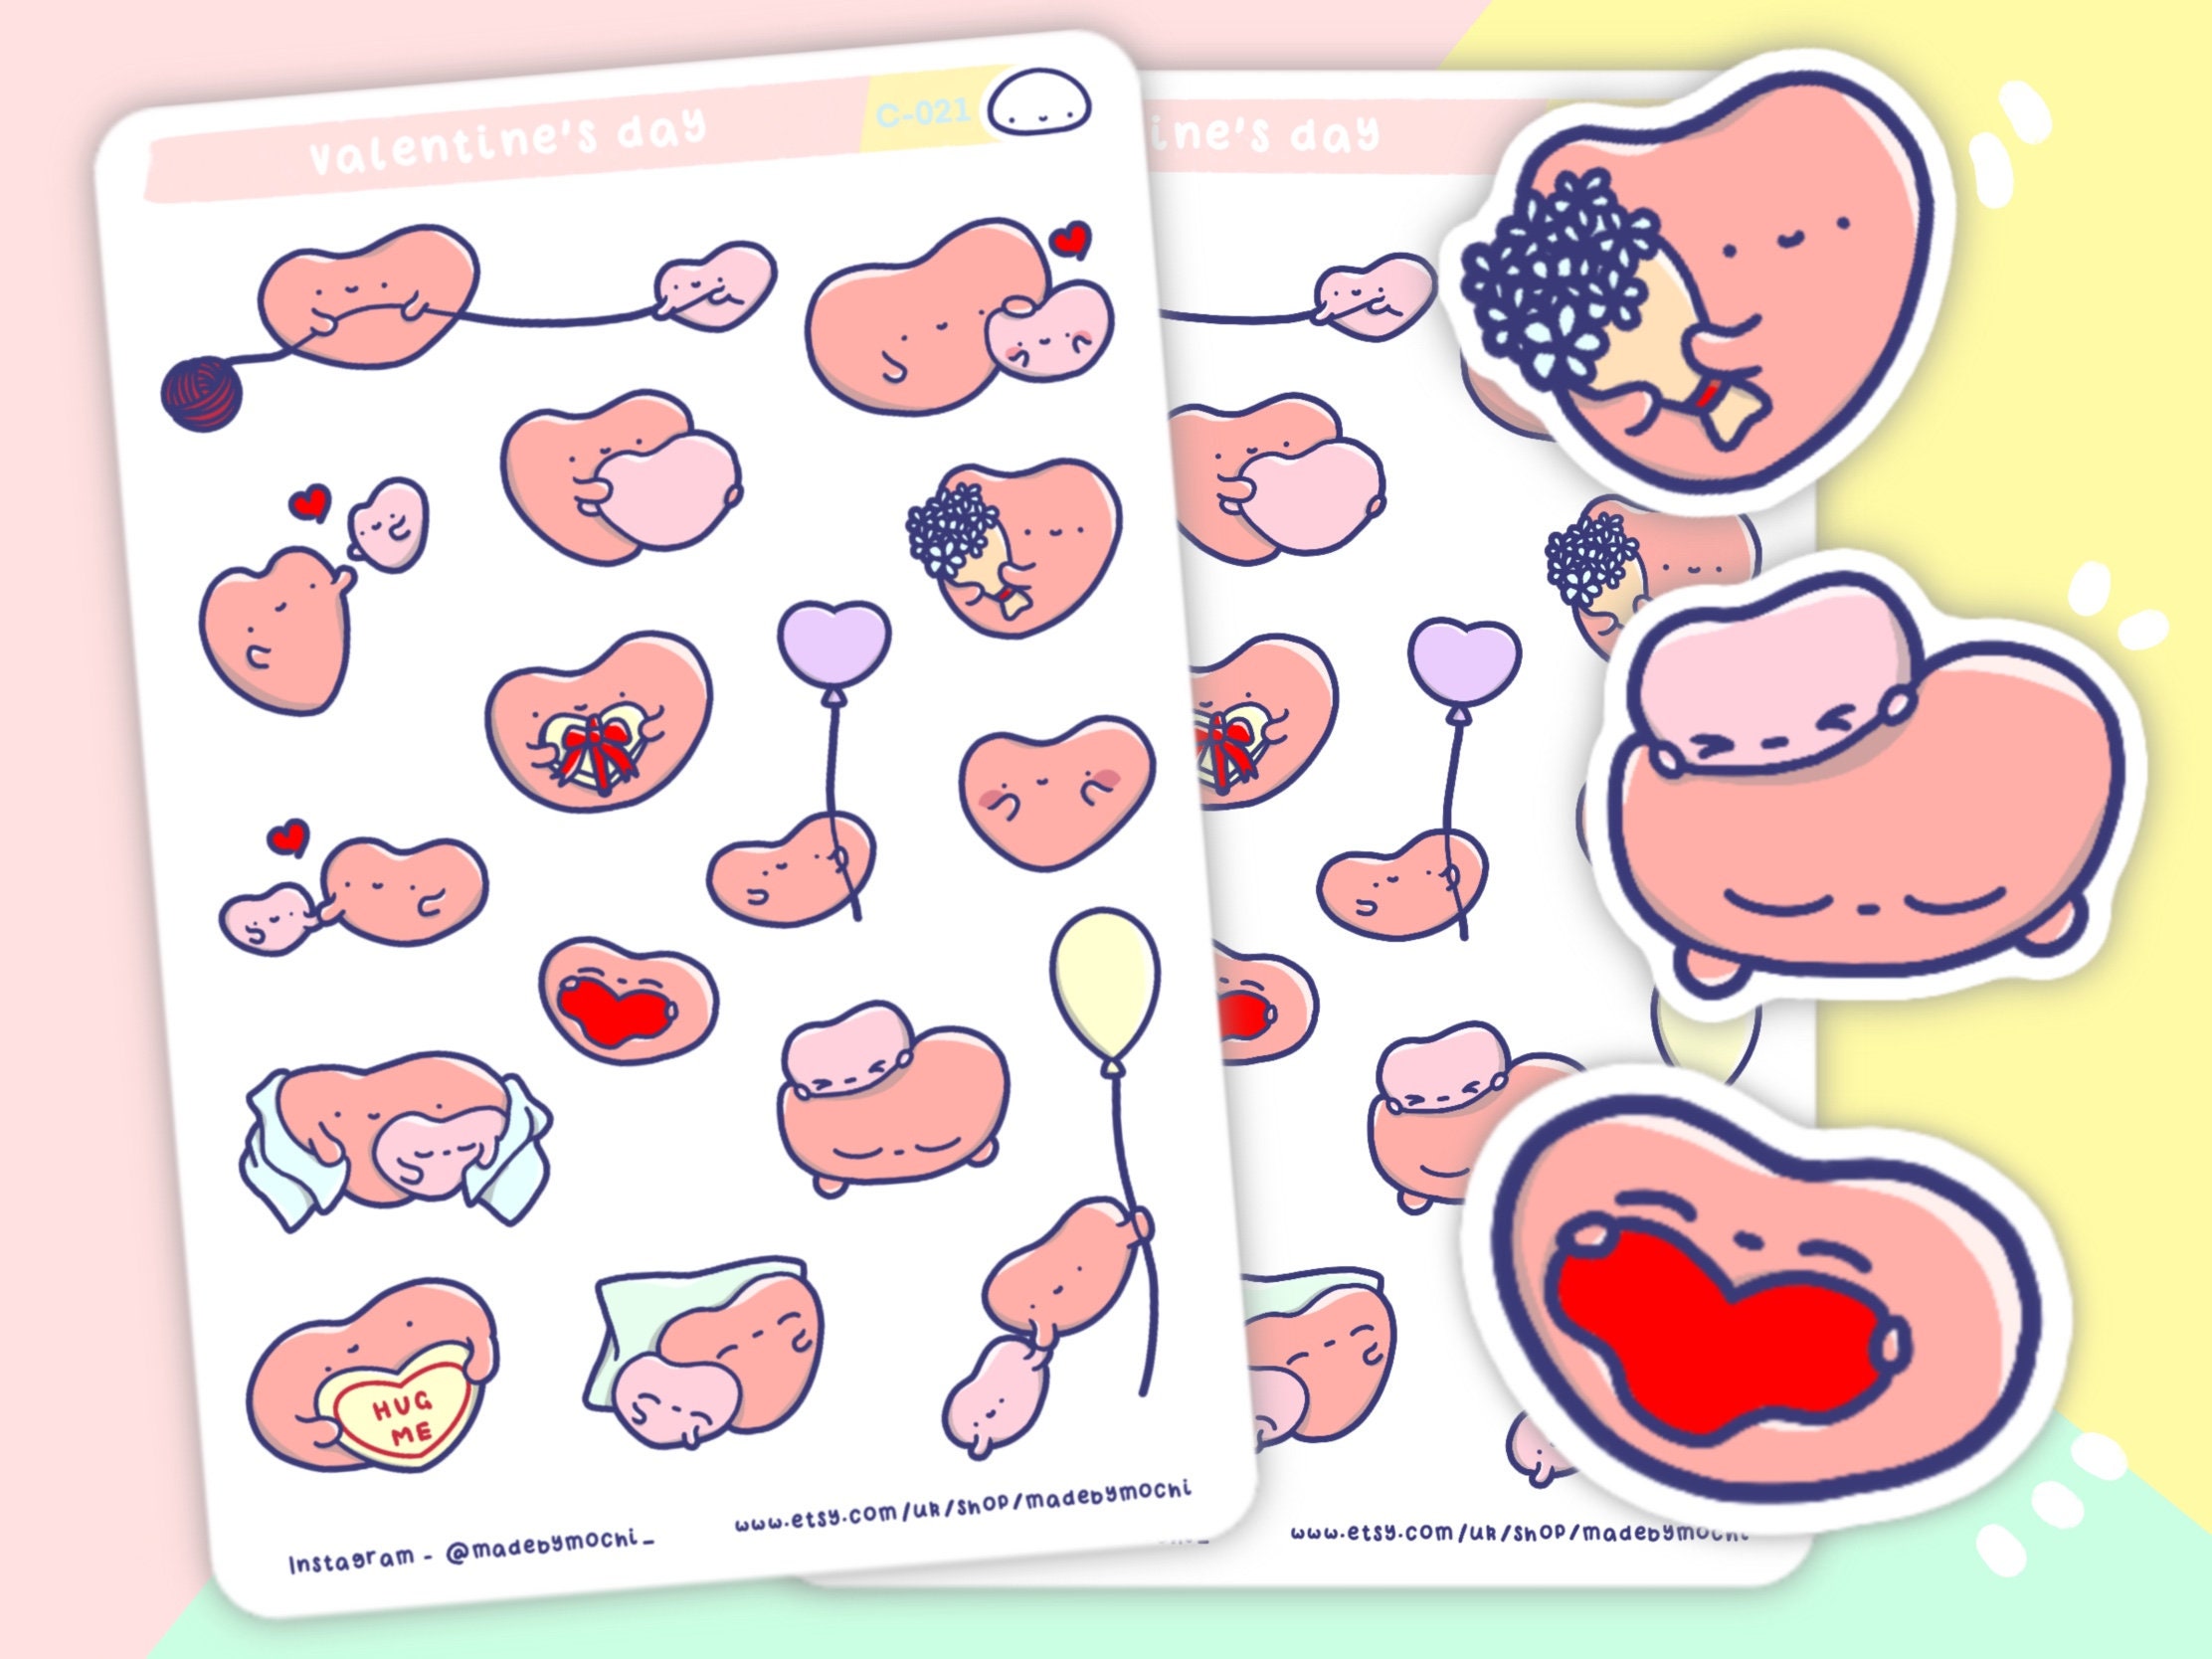 Cute valentines day stickers for planner, love letter or diary